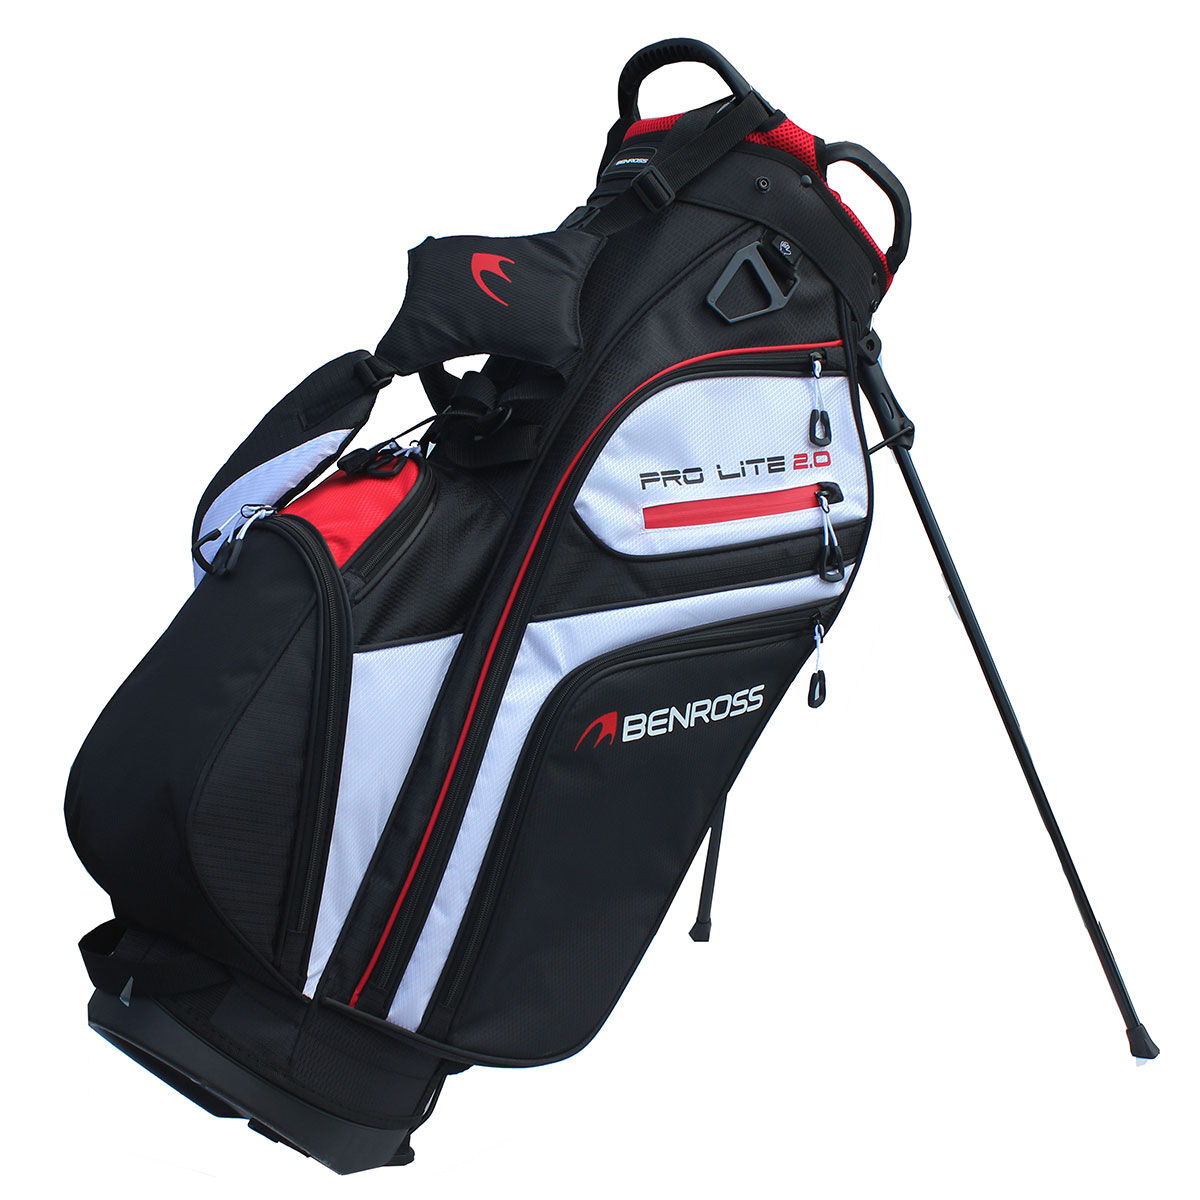 Benross Pro-Lite 2.0 Golf Stand Bag, Black/white/red, One Size | American Golf